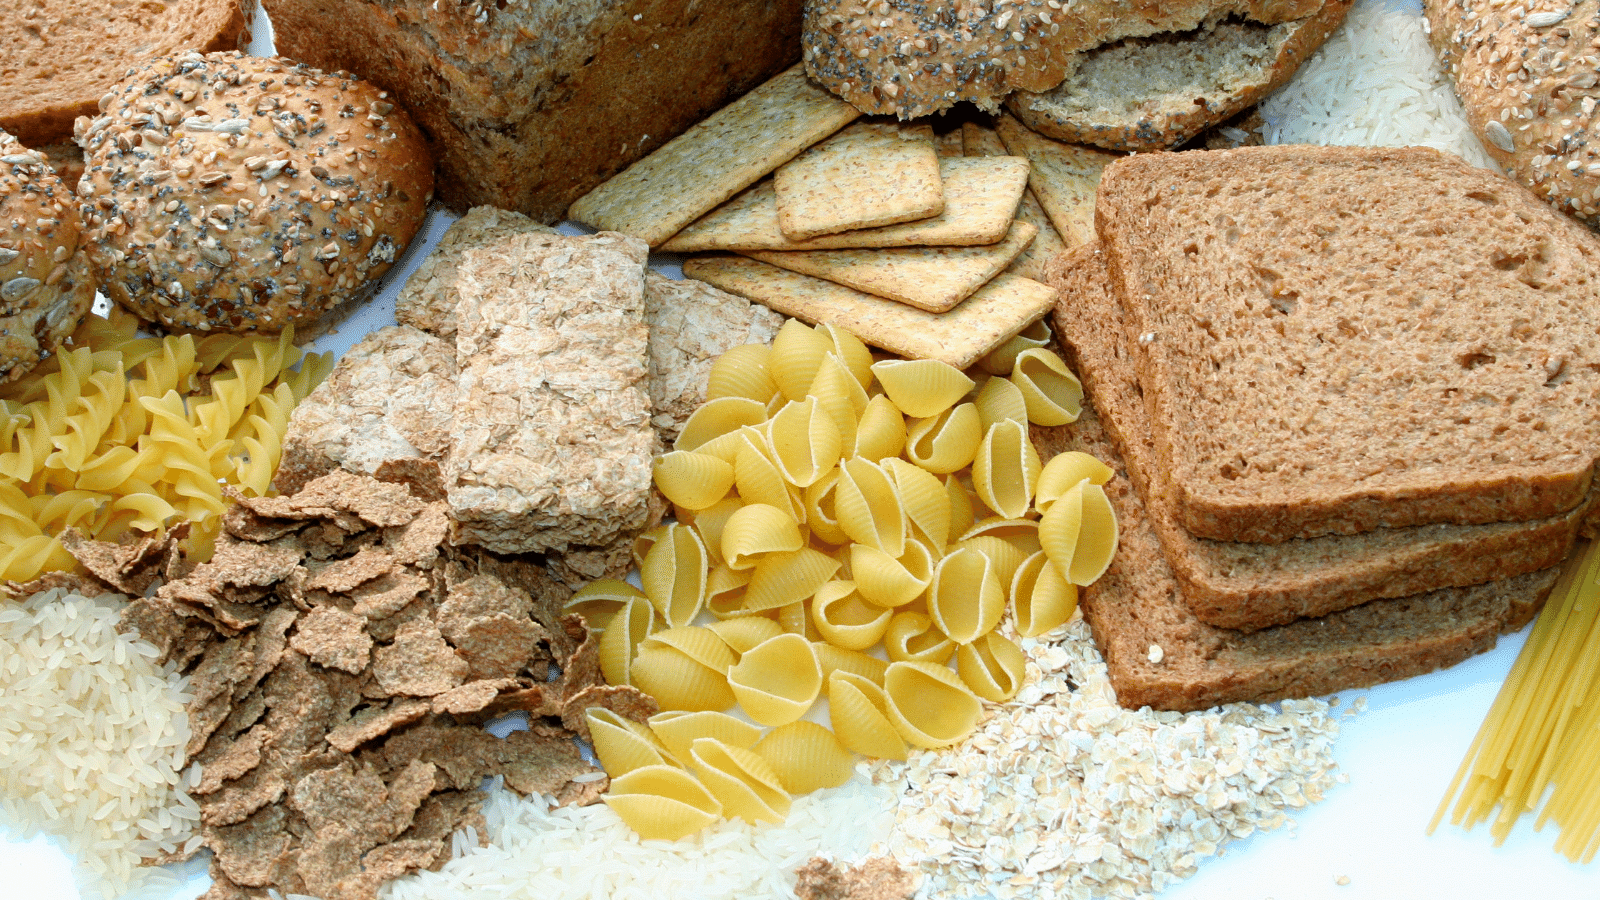 variety of grains such as bread, pasta, rice, crackers, and cereal